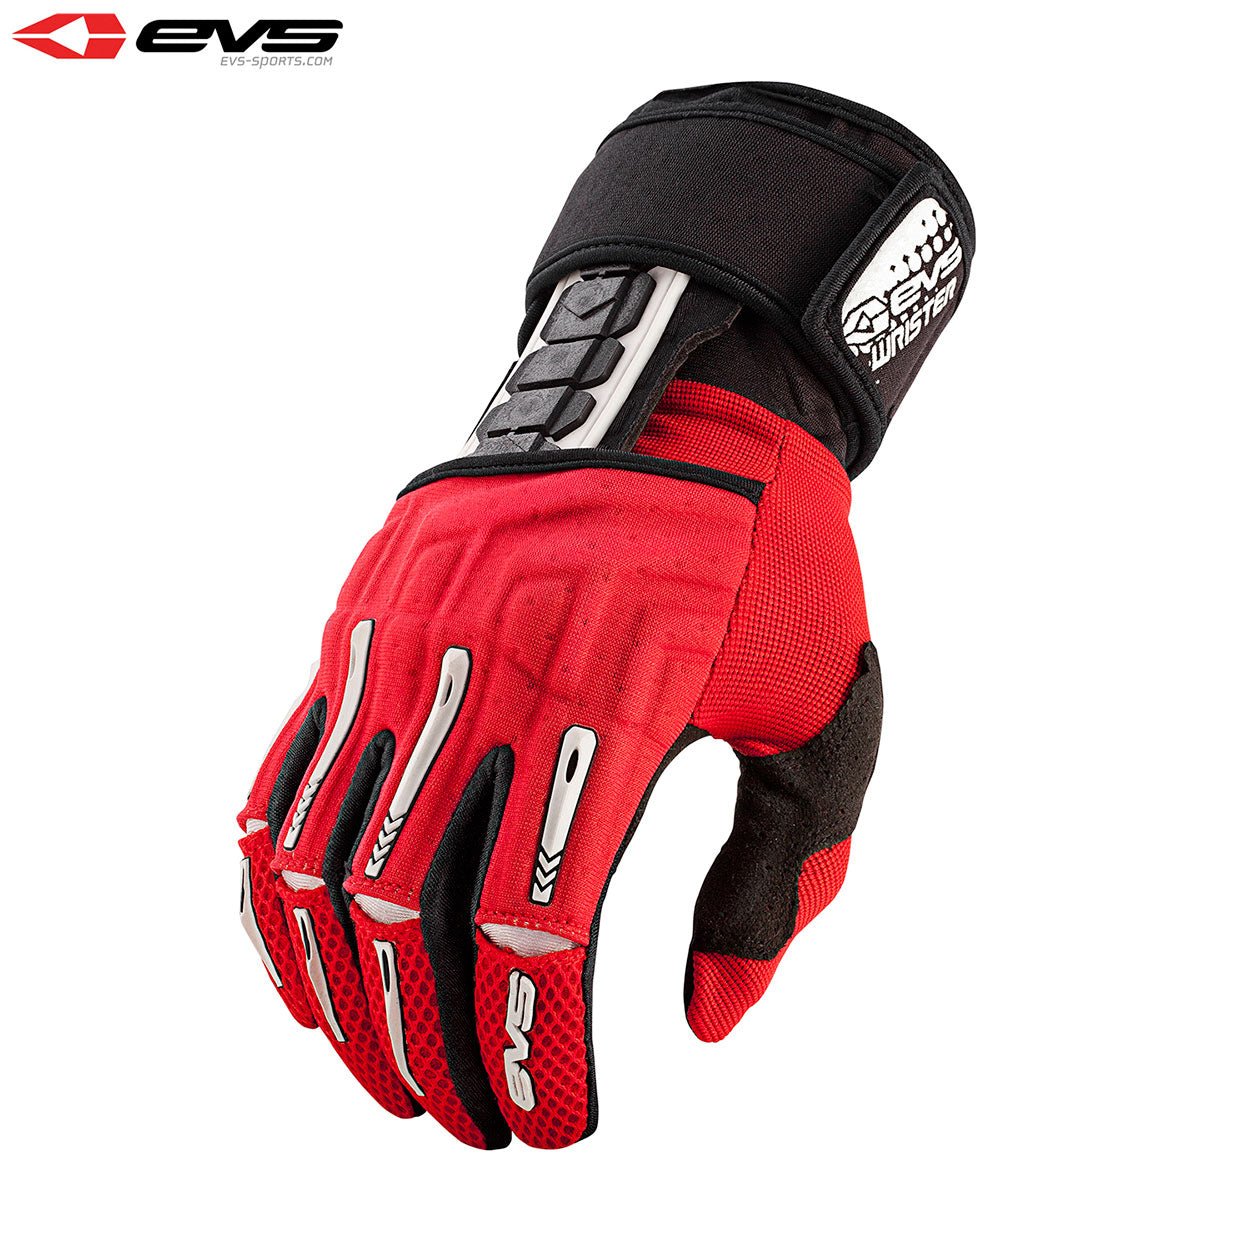 EVS Wrister Glove Wrist Brace Adult (Red) Pair Size Large - L / Red - EVS